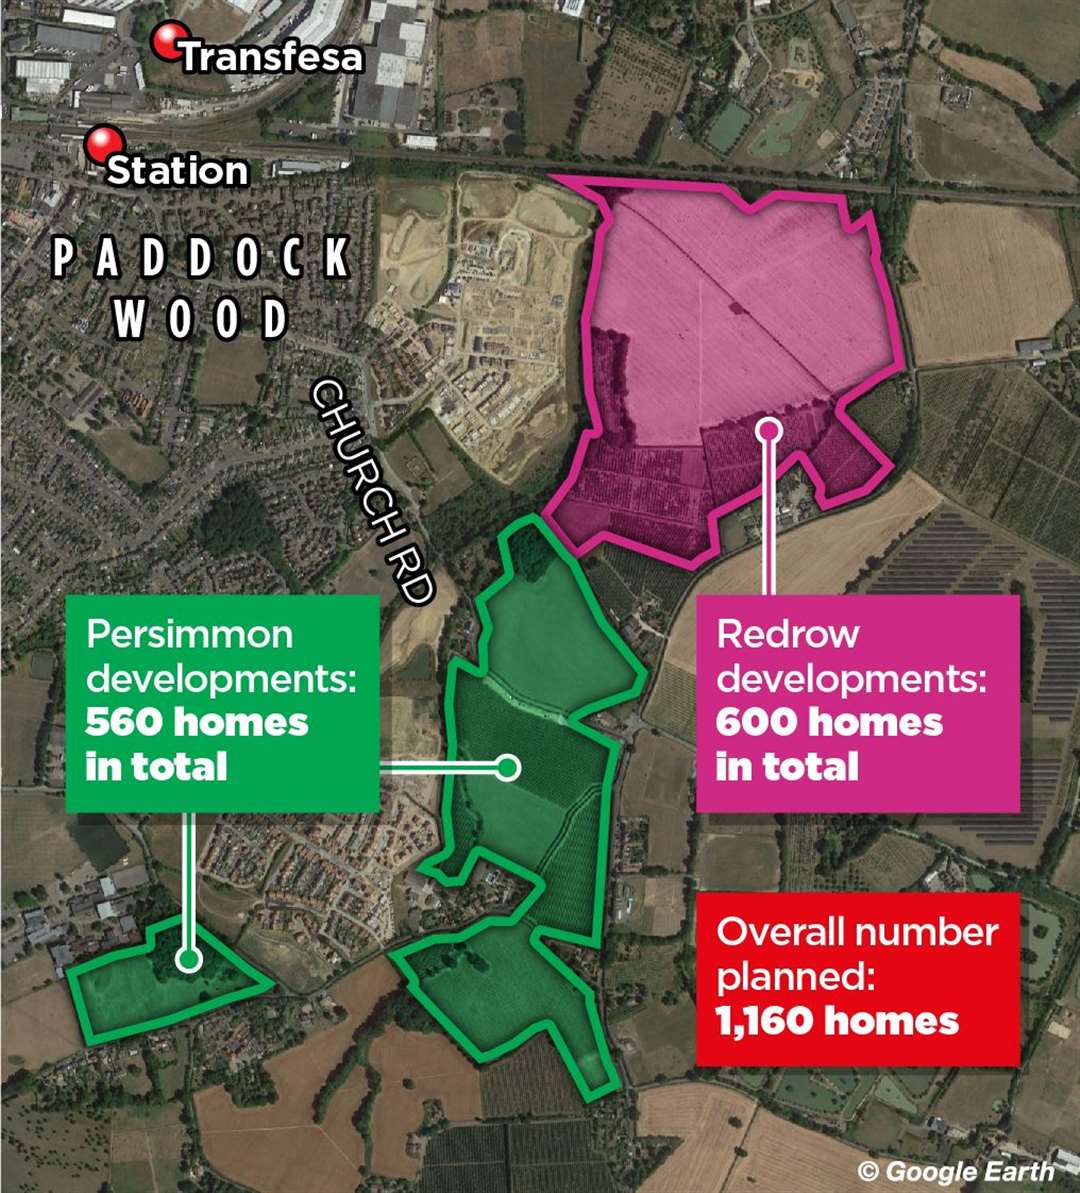 The site of the proposed home in Paddock Wood: Redrow and Persimmon (62302929)